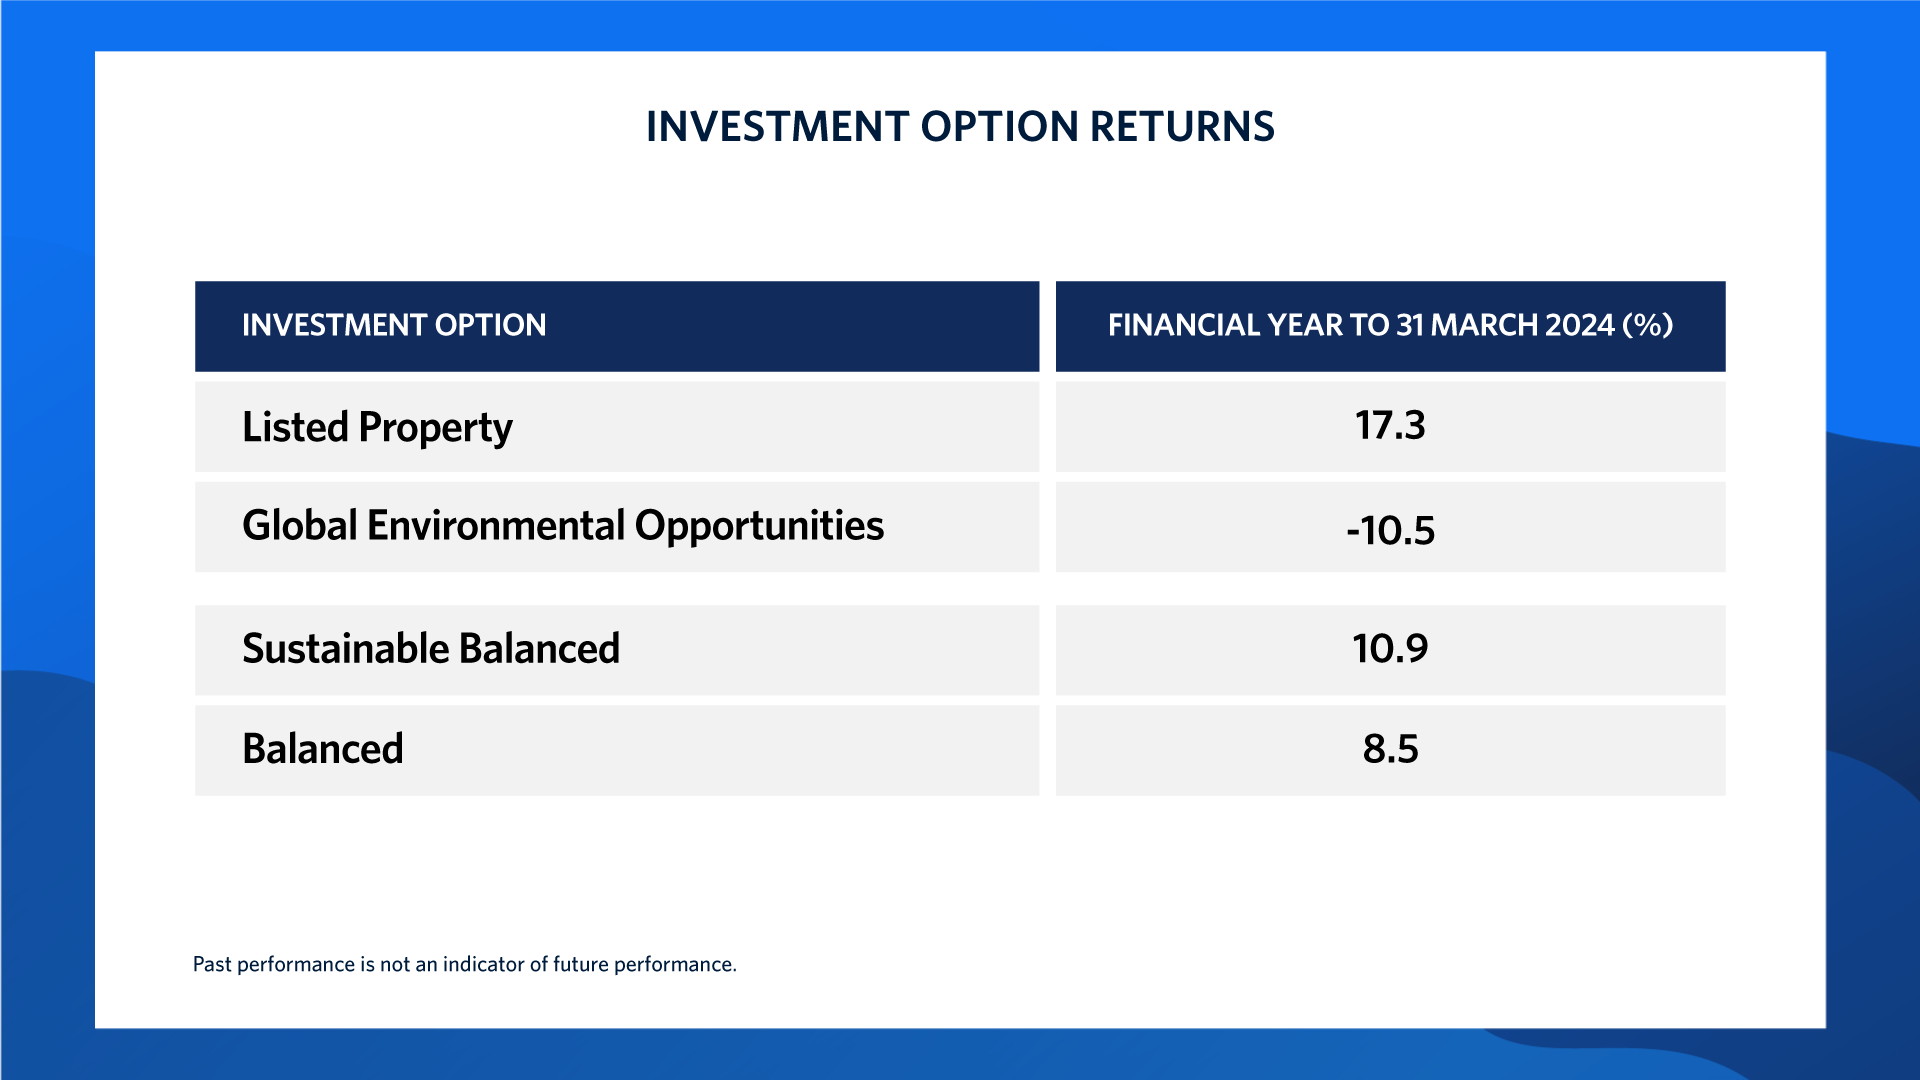 Table displaying the returns of several UniSuper investment options for the financial year to 31 March 2024. Listed Property is at the top of the list at 17.3%. The lowest performing option is Global Environmental Opportunities at -10.5%. Sustainable Balanced is 10.9%, and Balanced is at 8.5%. 